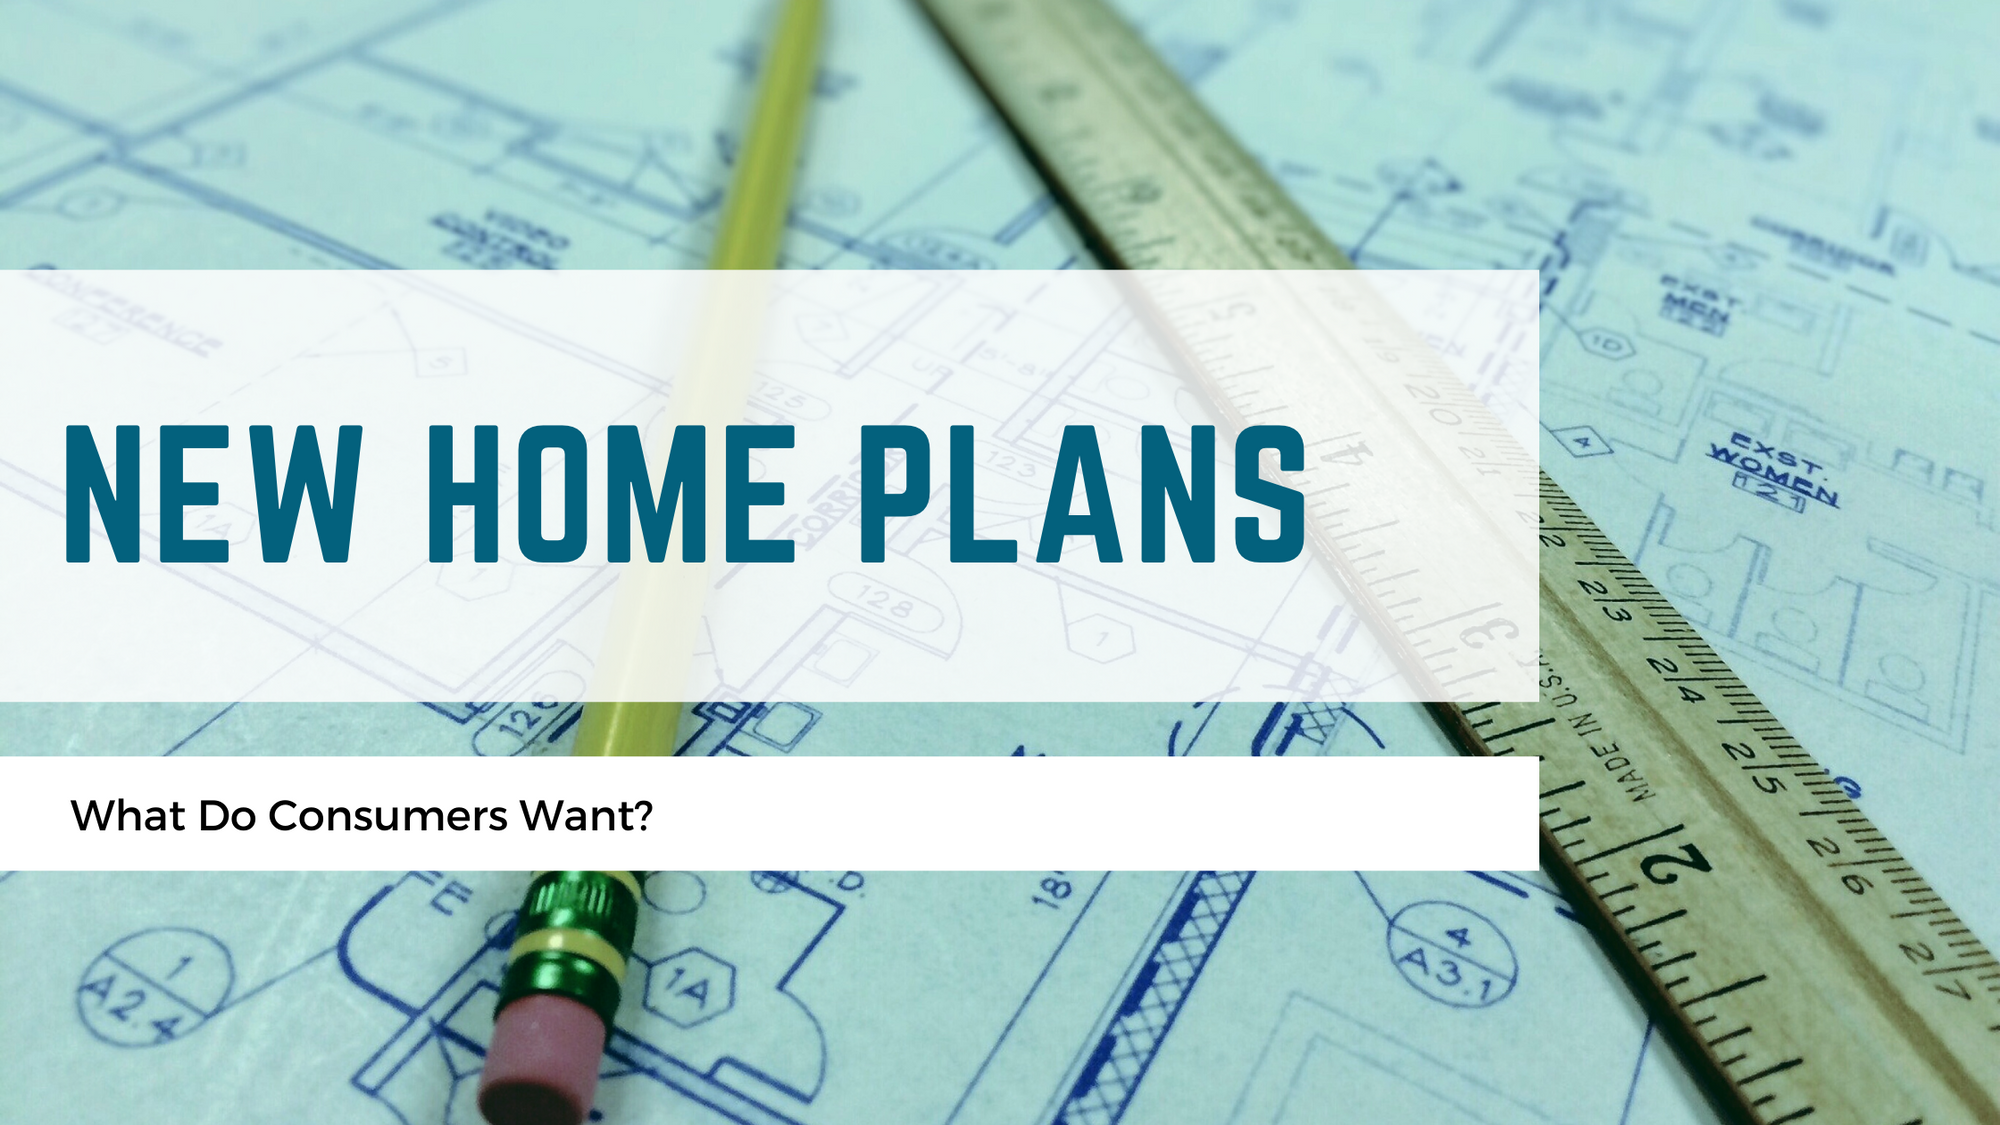 New Home Plans: What Do Consumers Want?